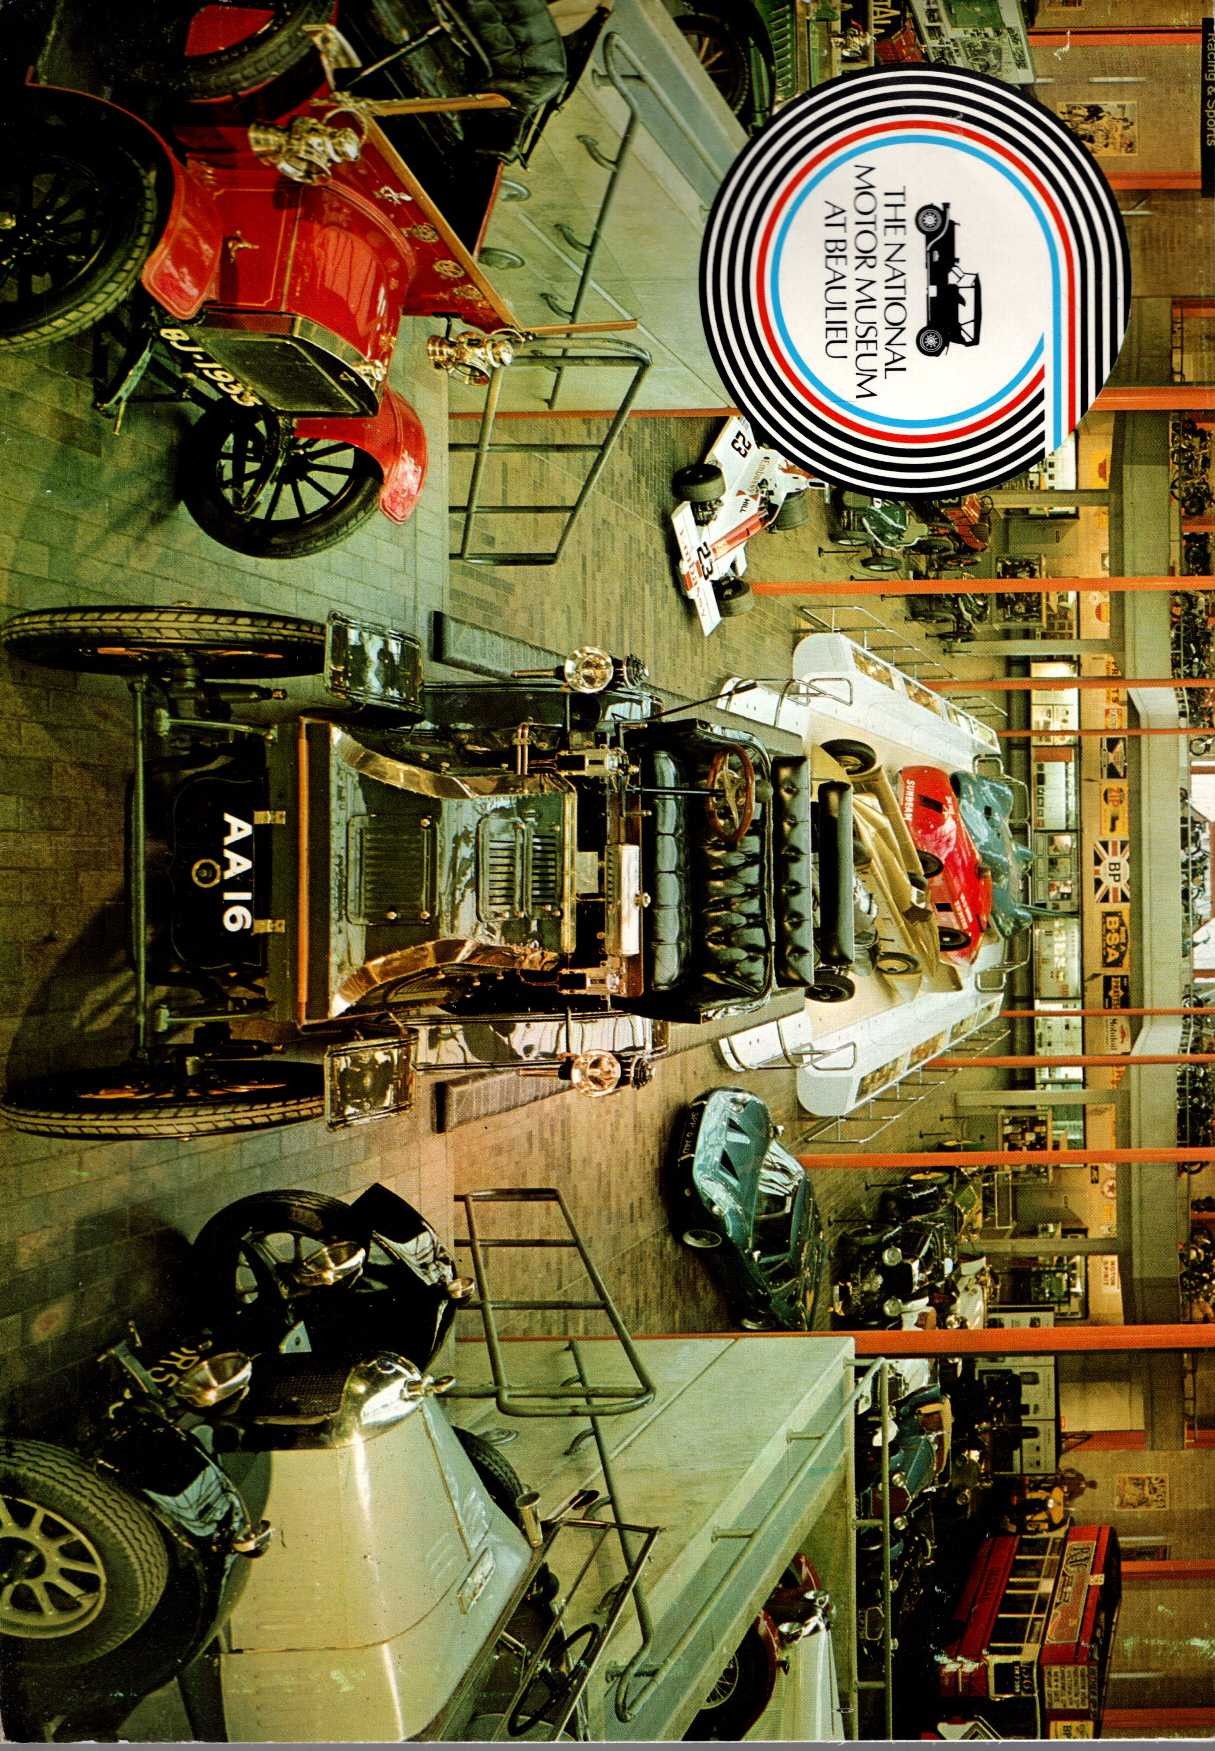 The NATIONAL MOTOR MUSEUM AT BEAULIEU Anonymous front book cover image